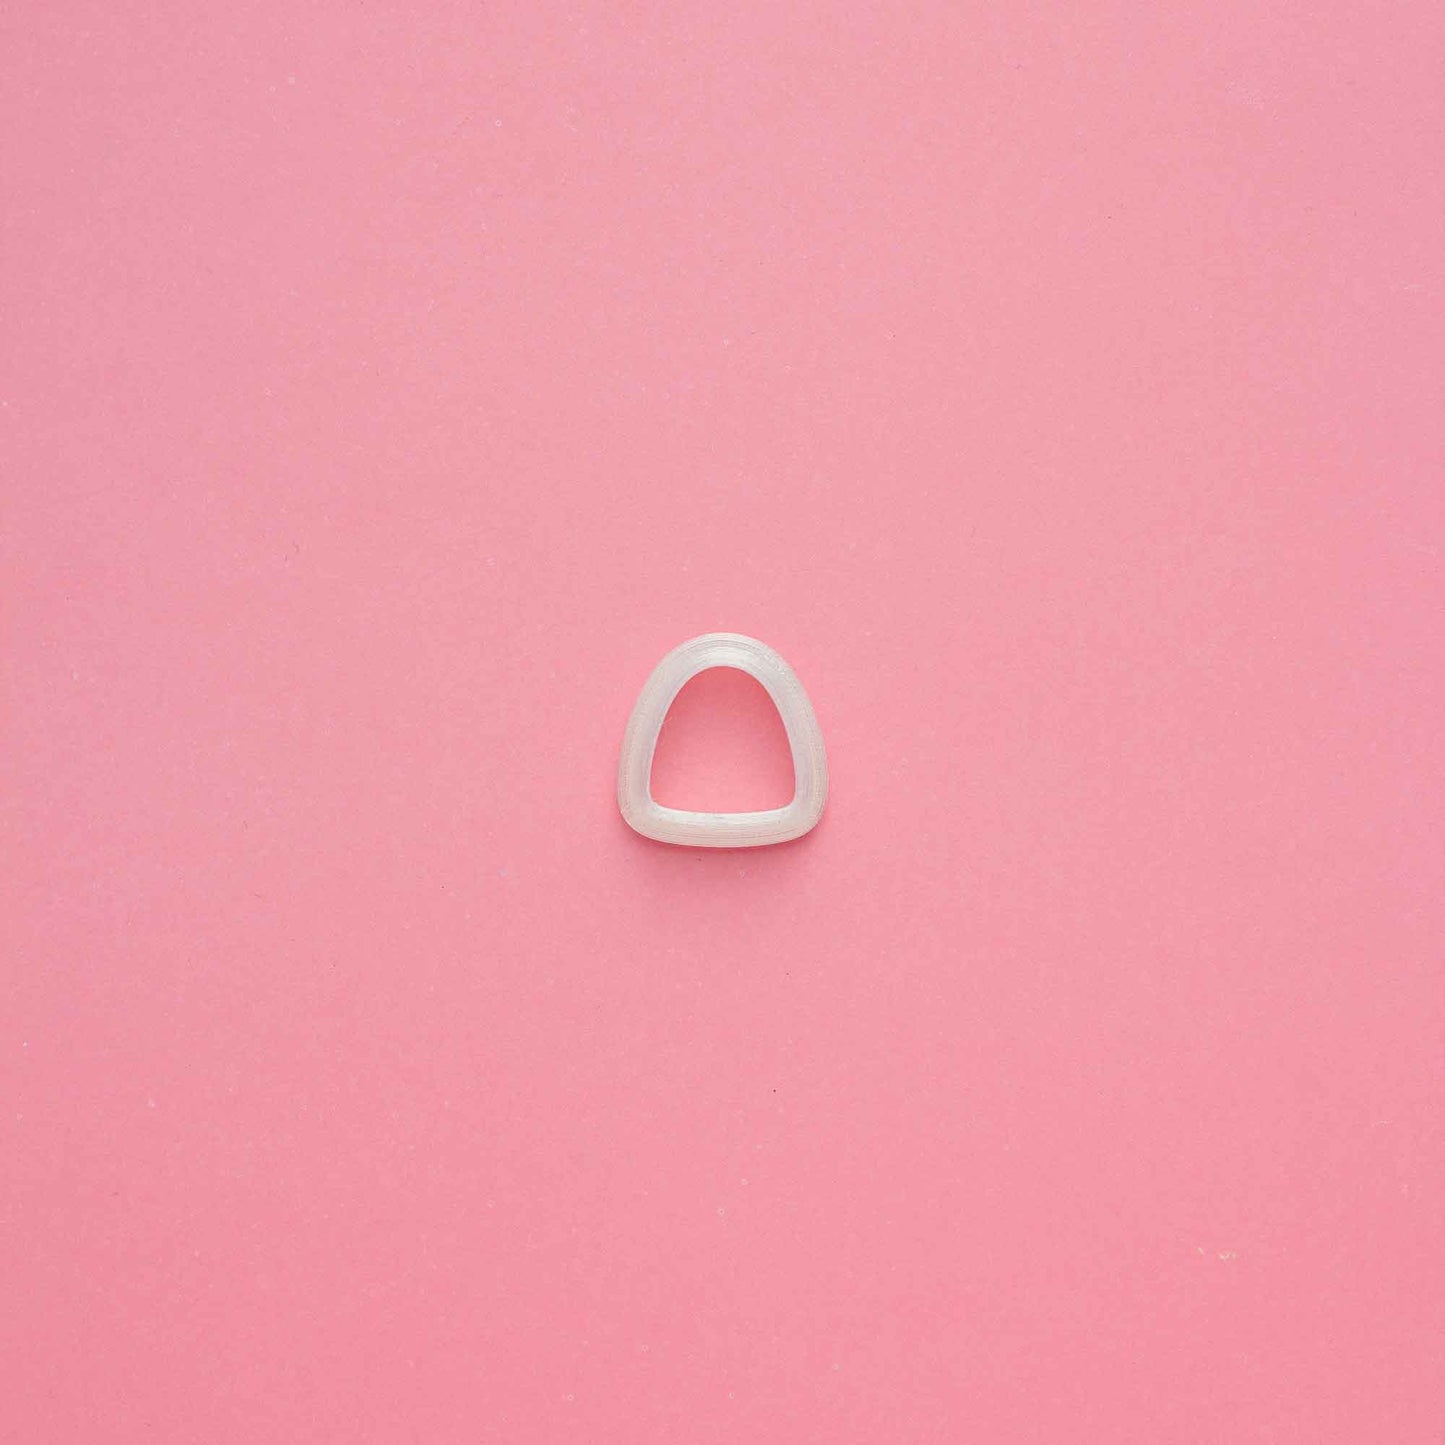 1 clay organic triangle clay cutter on a pink background